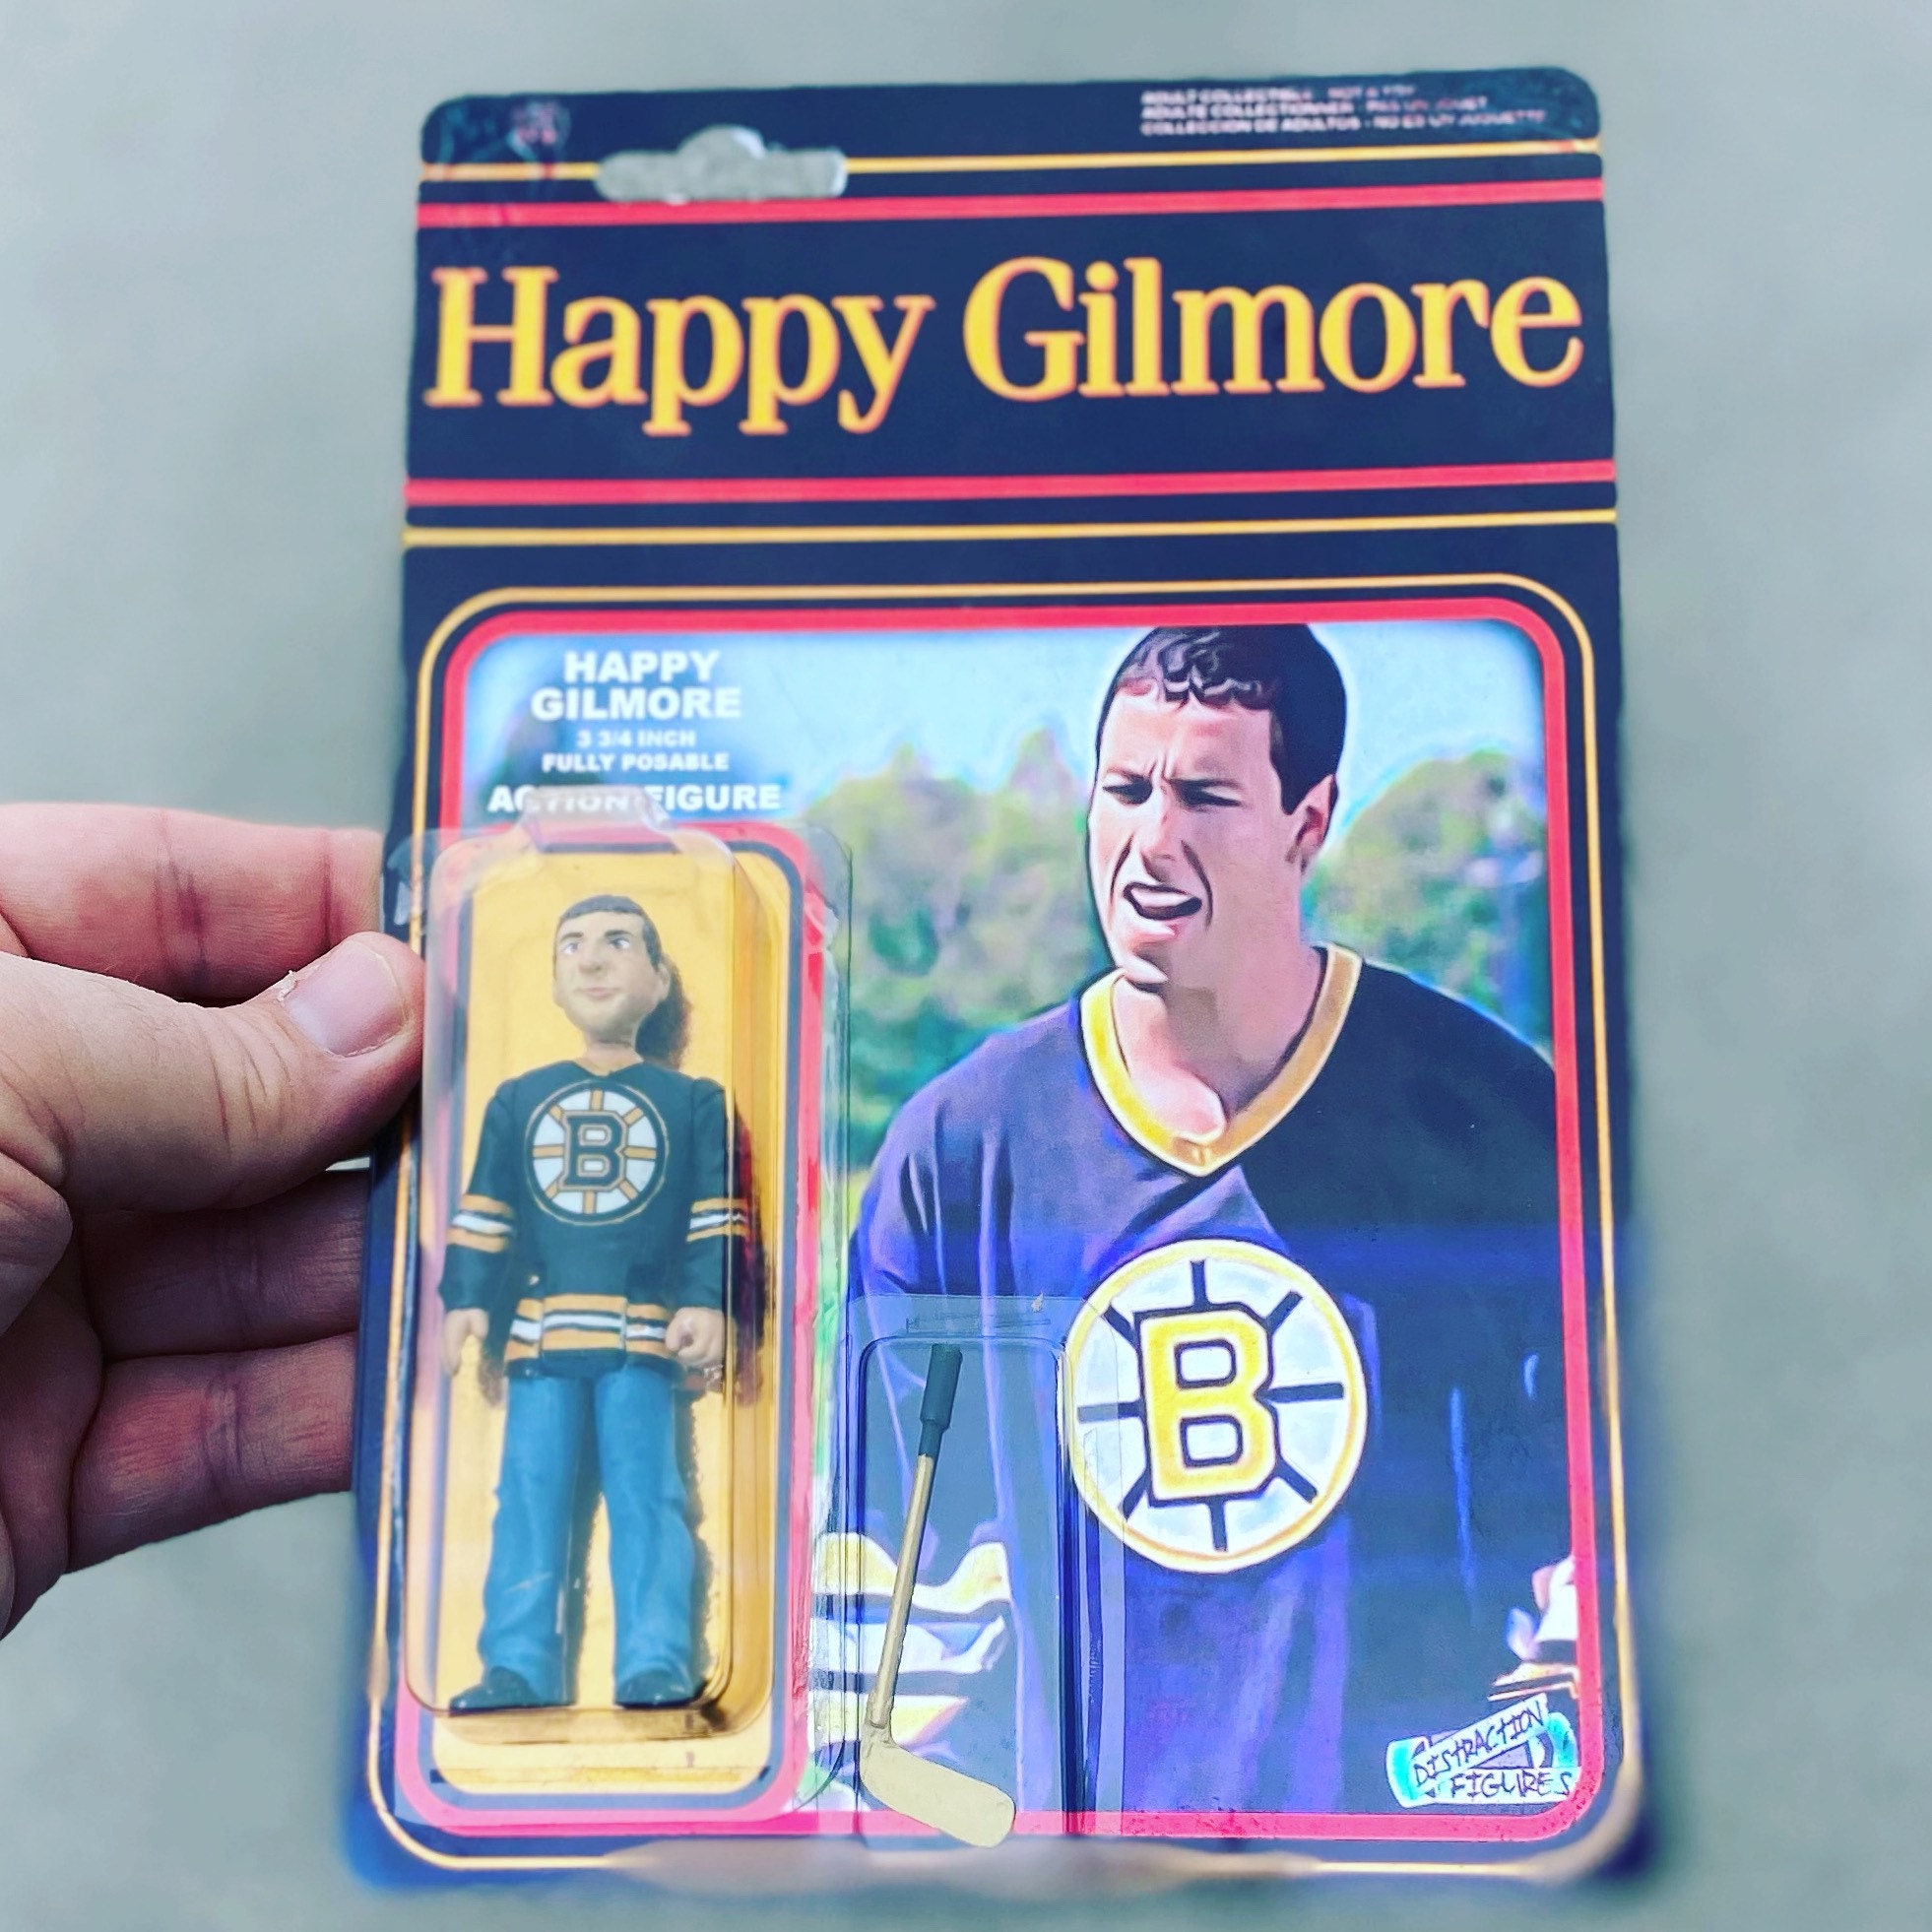 The DIY Guide of Happy Gilmore Costume